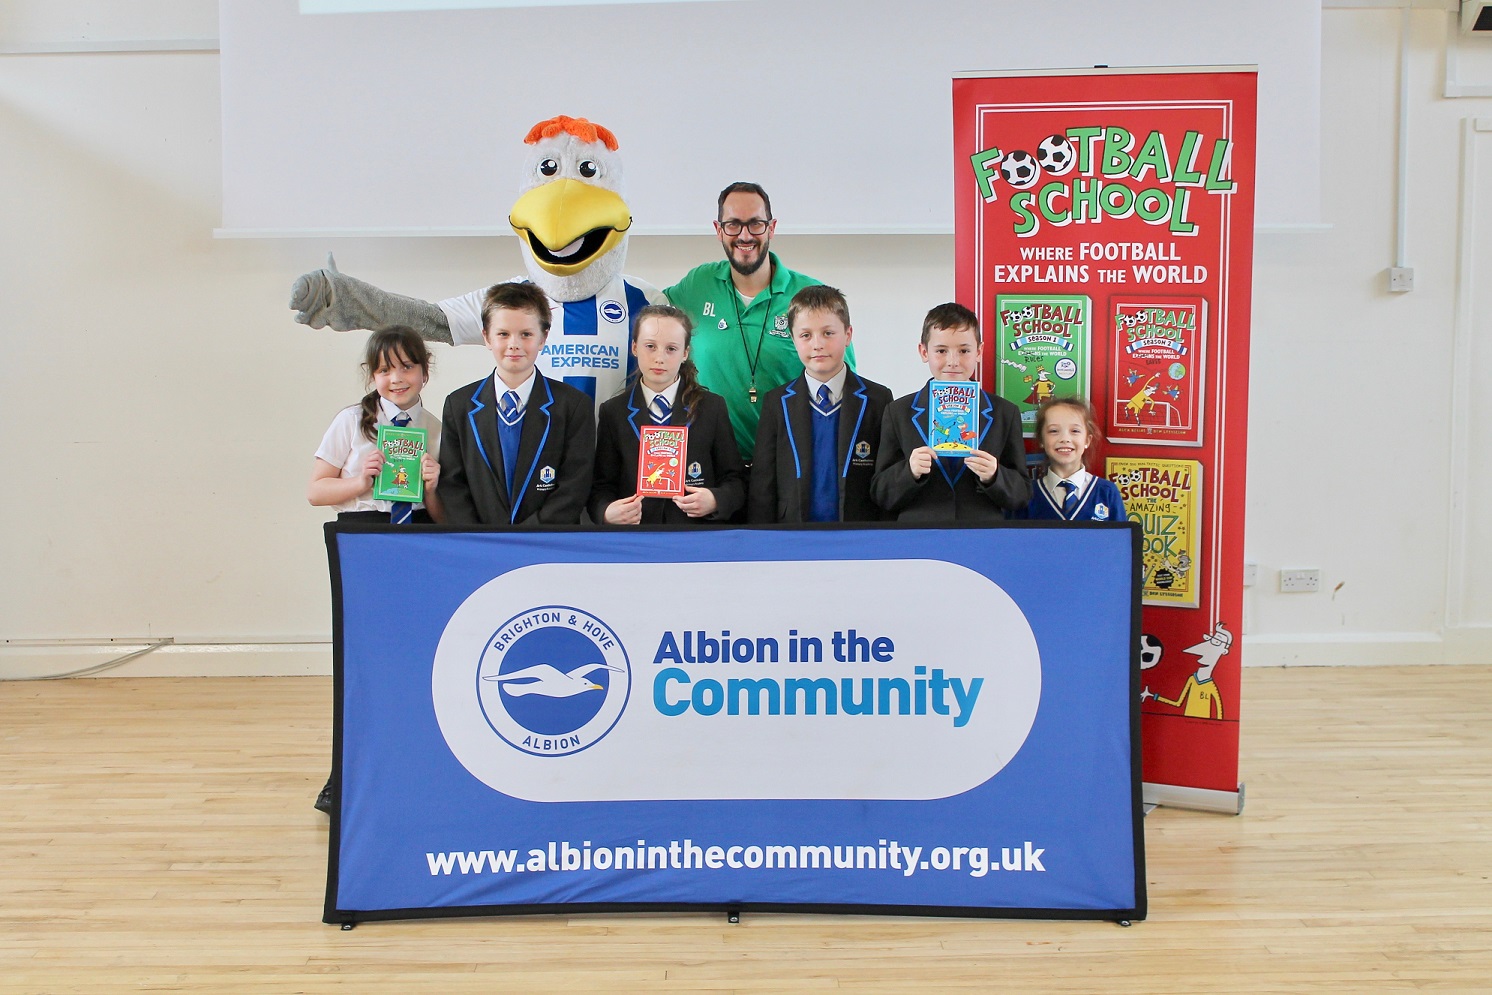 Football-themed fun for pupils as part of reading campaign